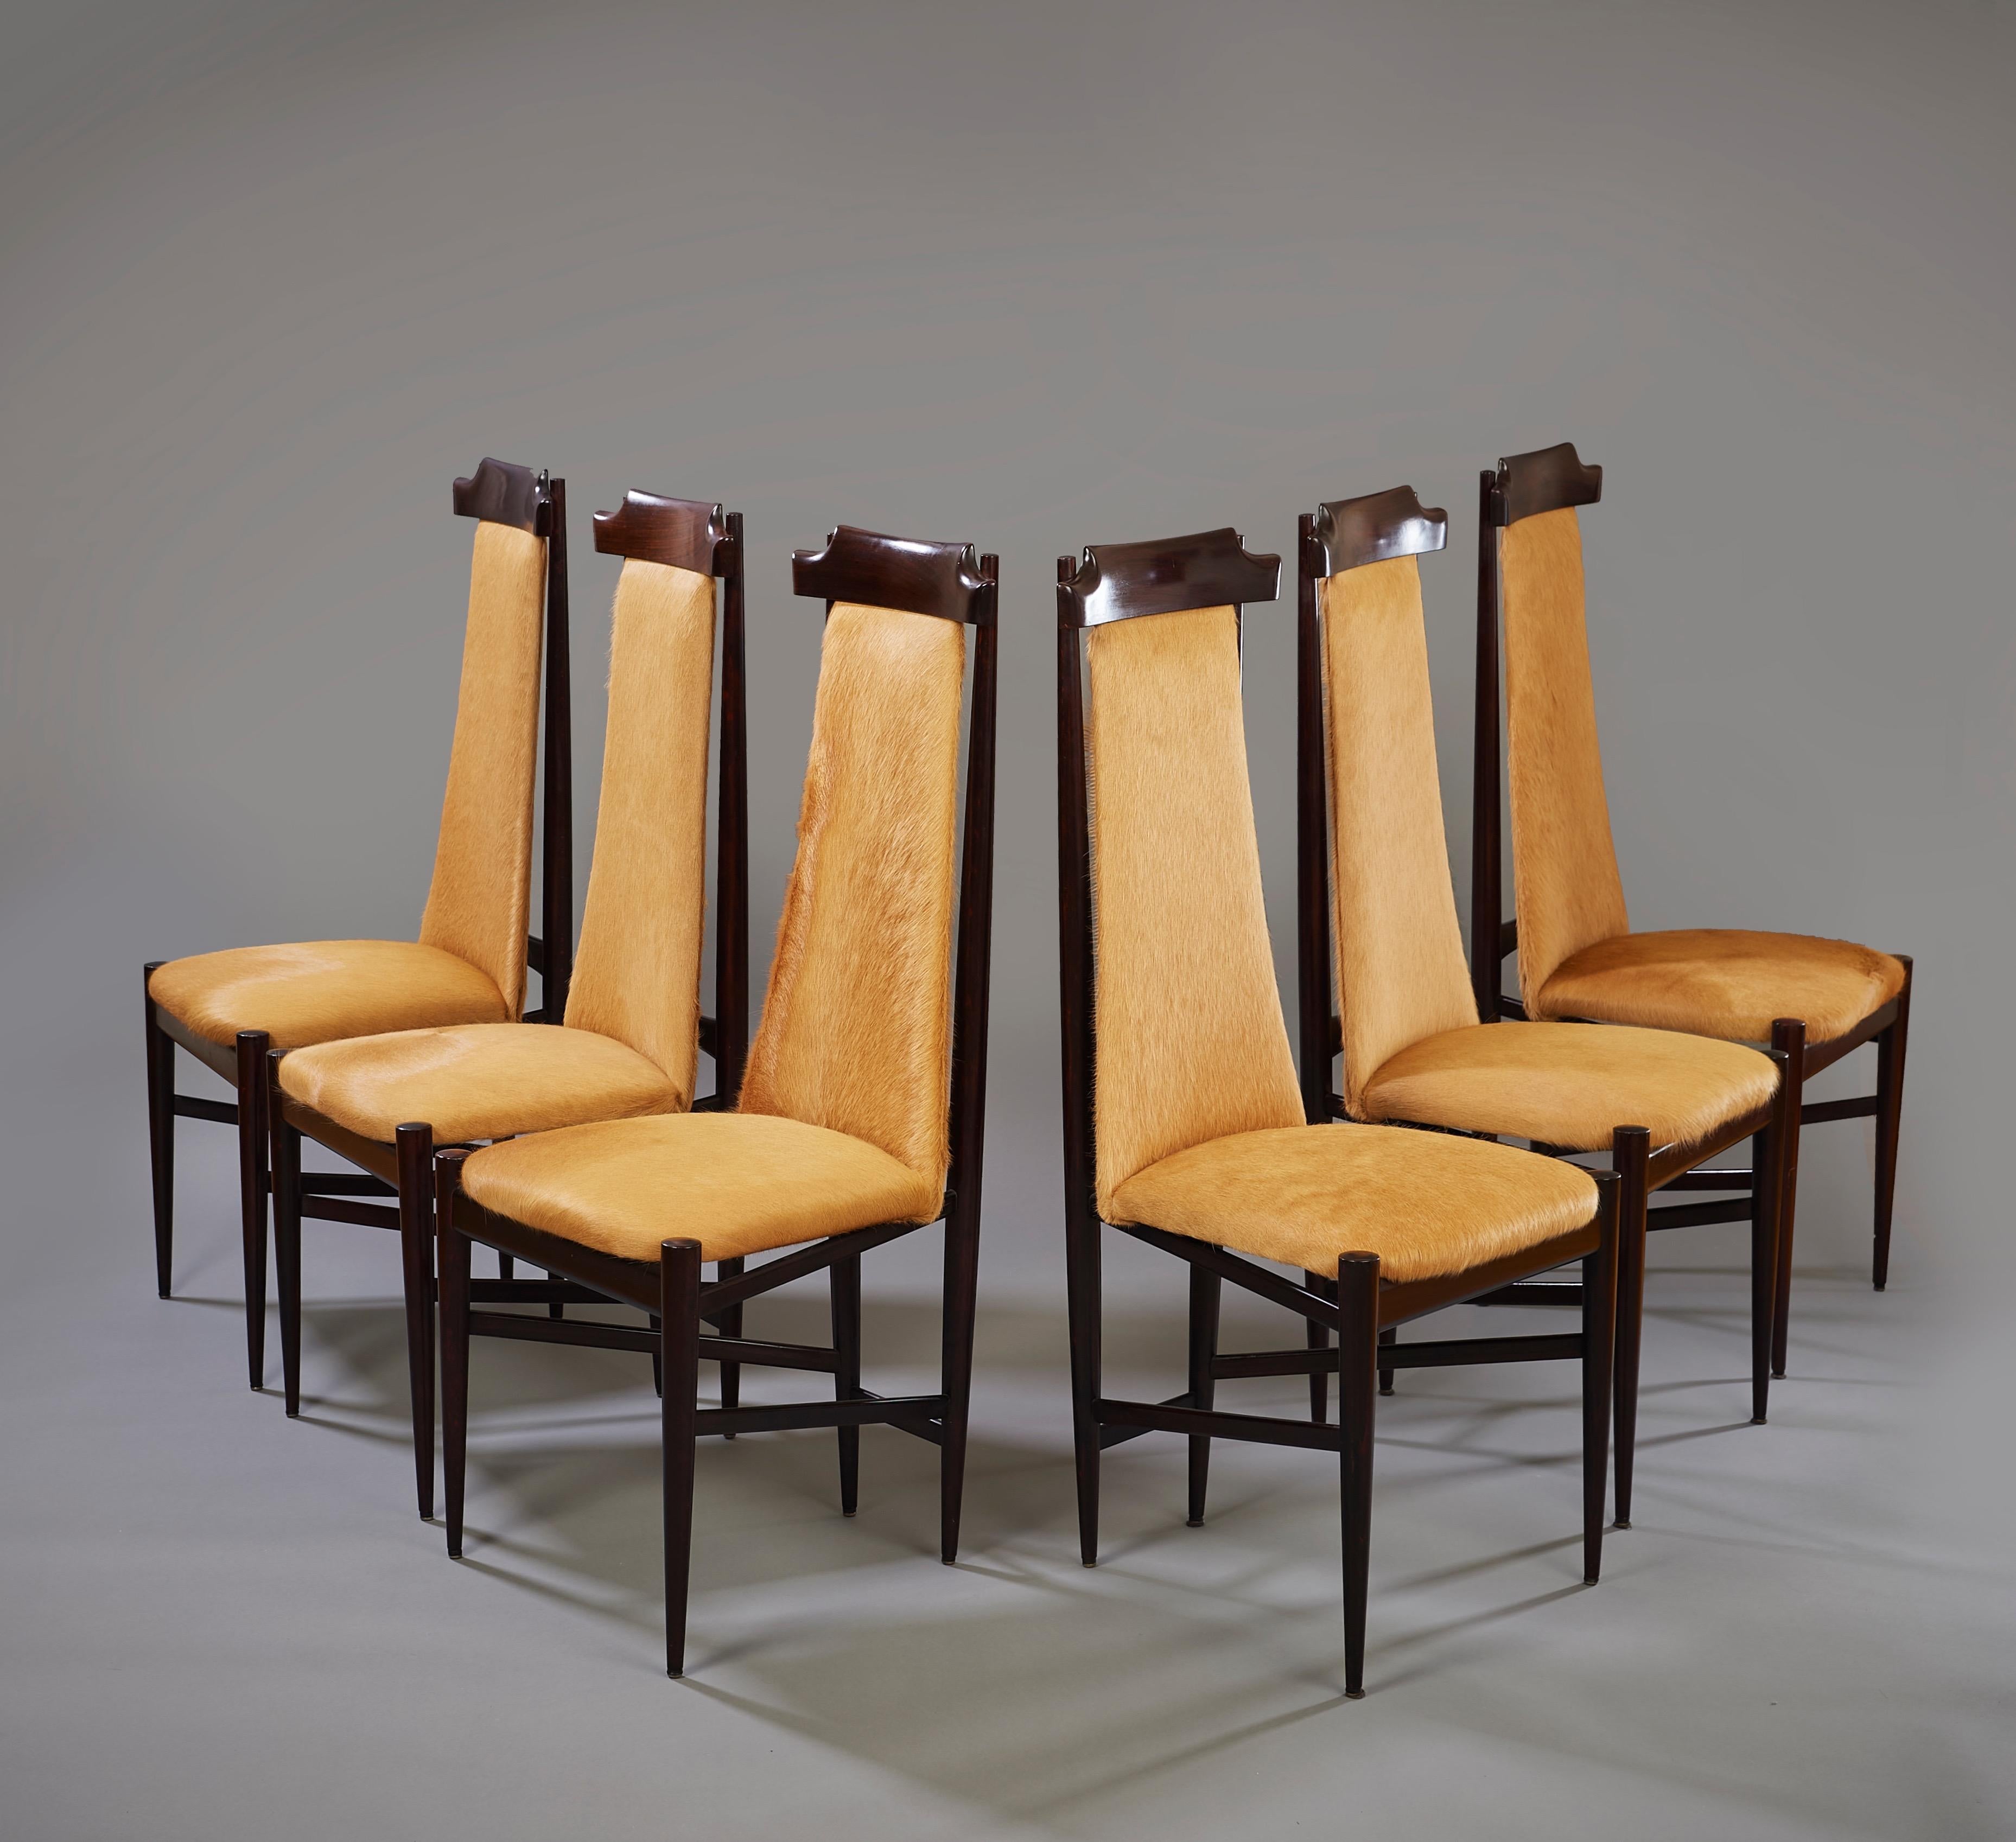 Sergio Rodrigues (1927–2014)

A striking set of six modernist dining chairs by Carioca design pioneer Sérgio Rodrigues, in hardwood upholstered in unshaved caramel-colored cowhide. The chairs synthesize a unique combination of Shaker, De Stijl, and